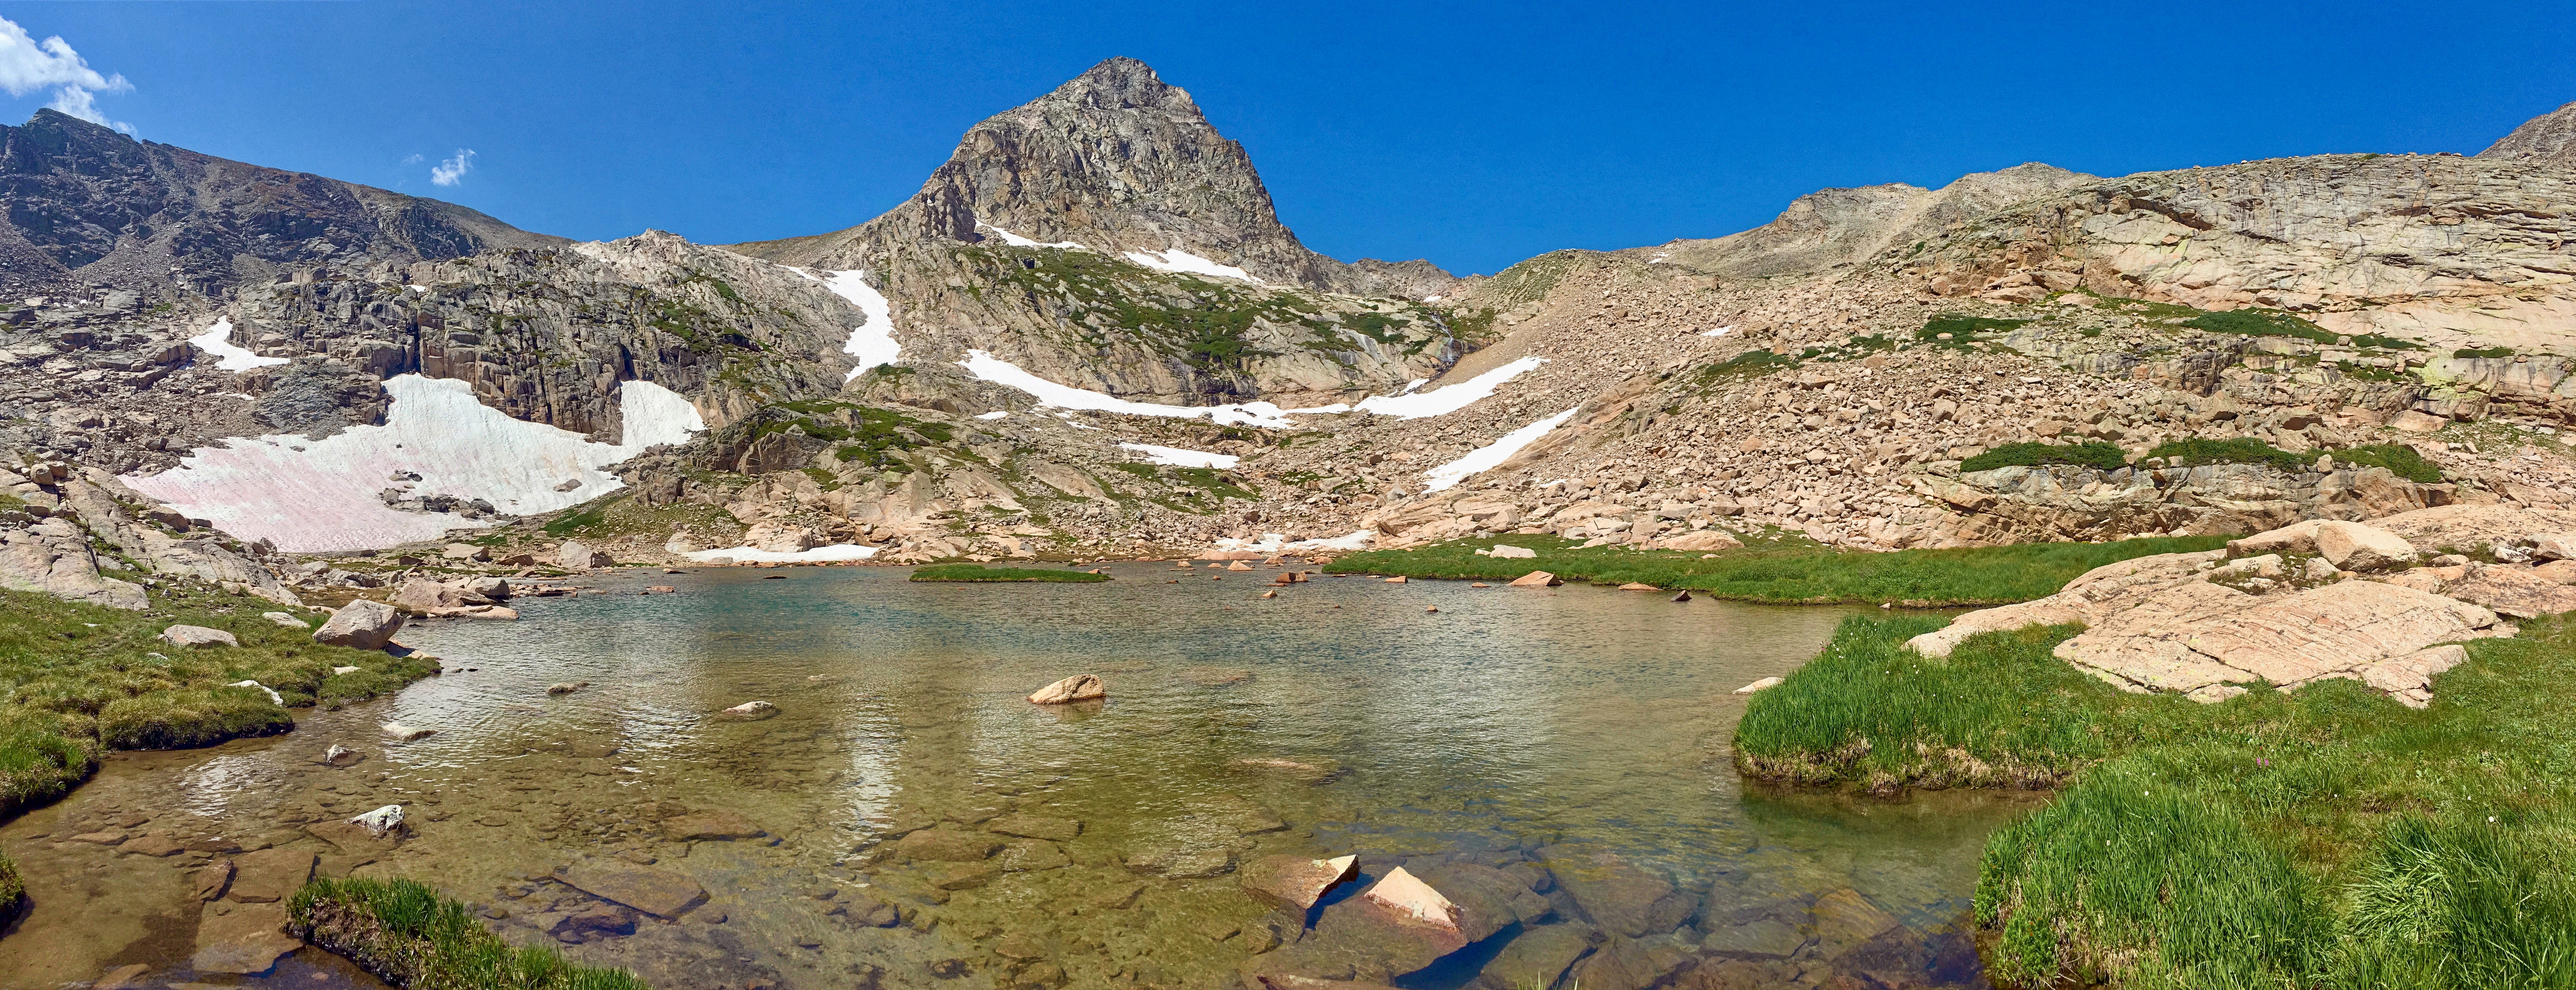 2017 - Mount Toll and Blue Lake, Indian Peaks Wilderness, Colorado. August, 2017.